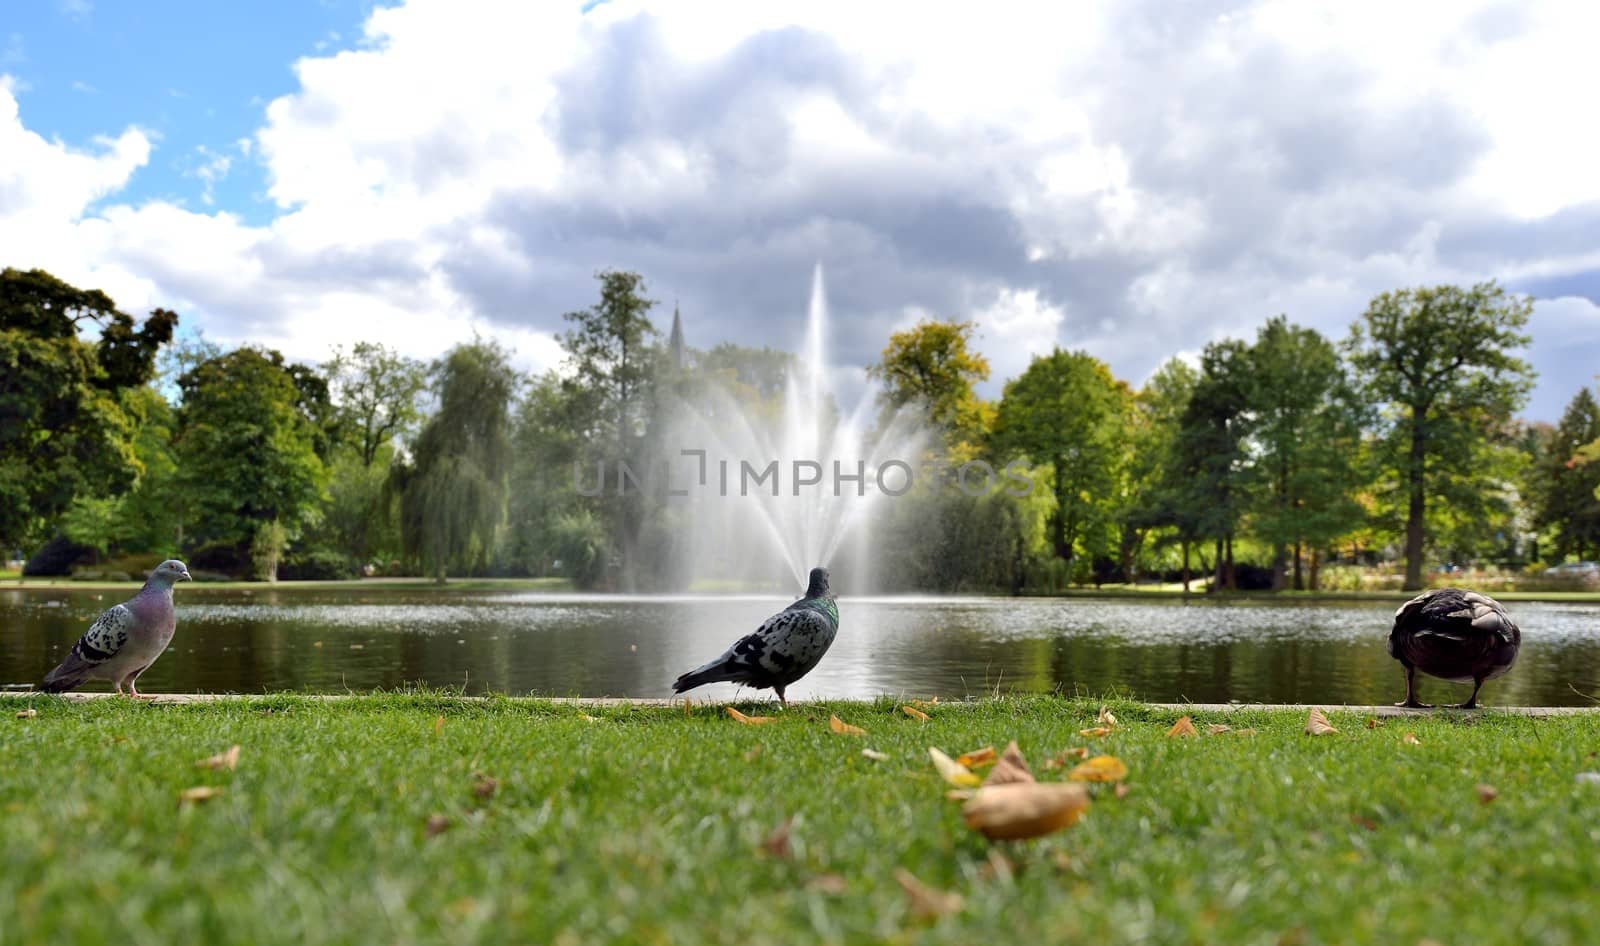 Pigeons and ducks at the lake in the park. A fountain in the background.